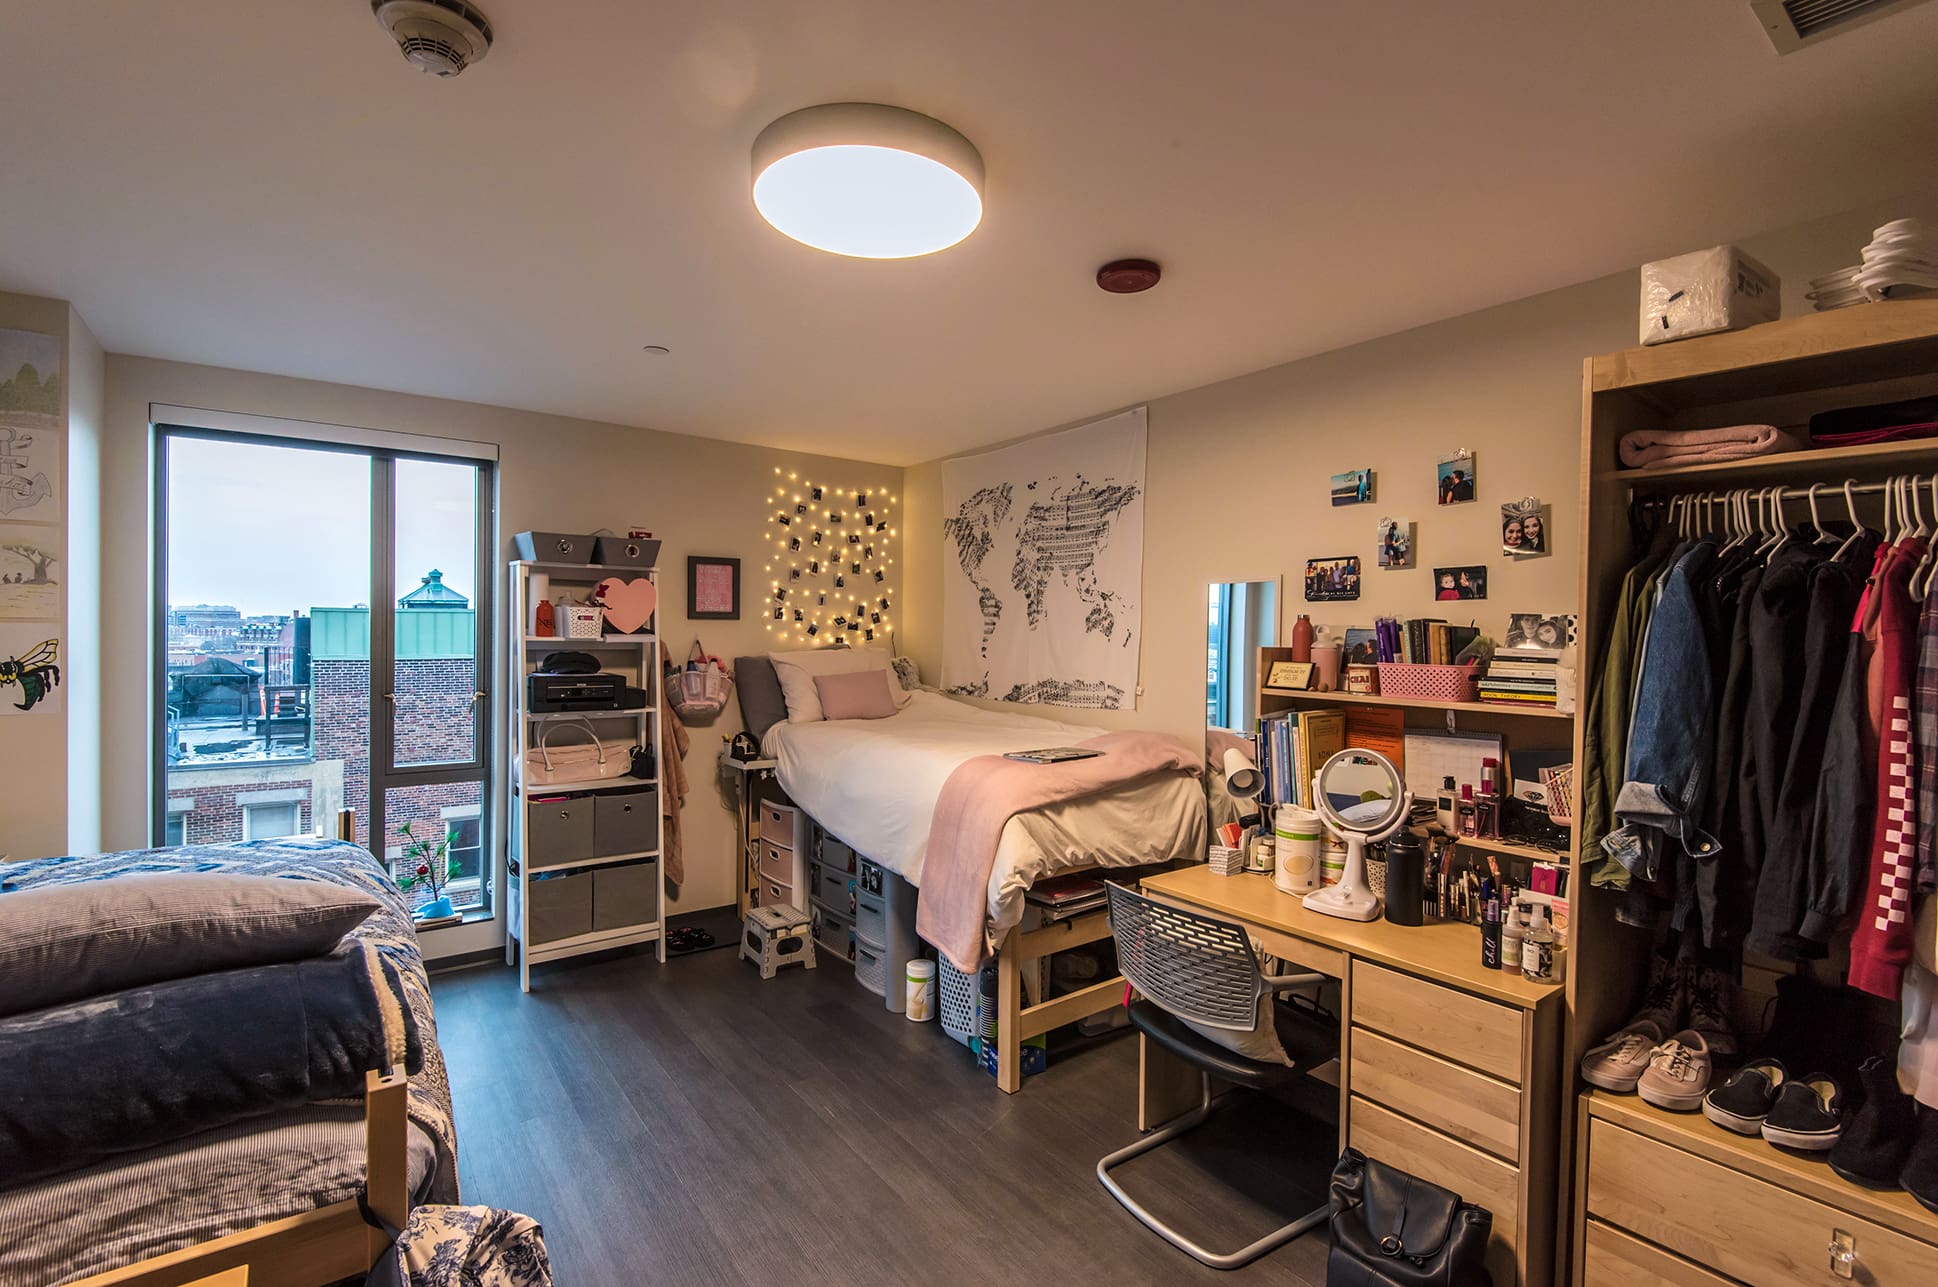 A well-decorated double room in the residence hall.